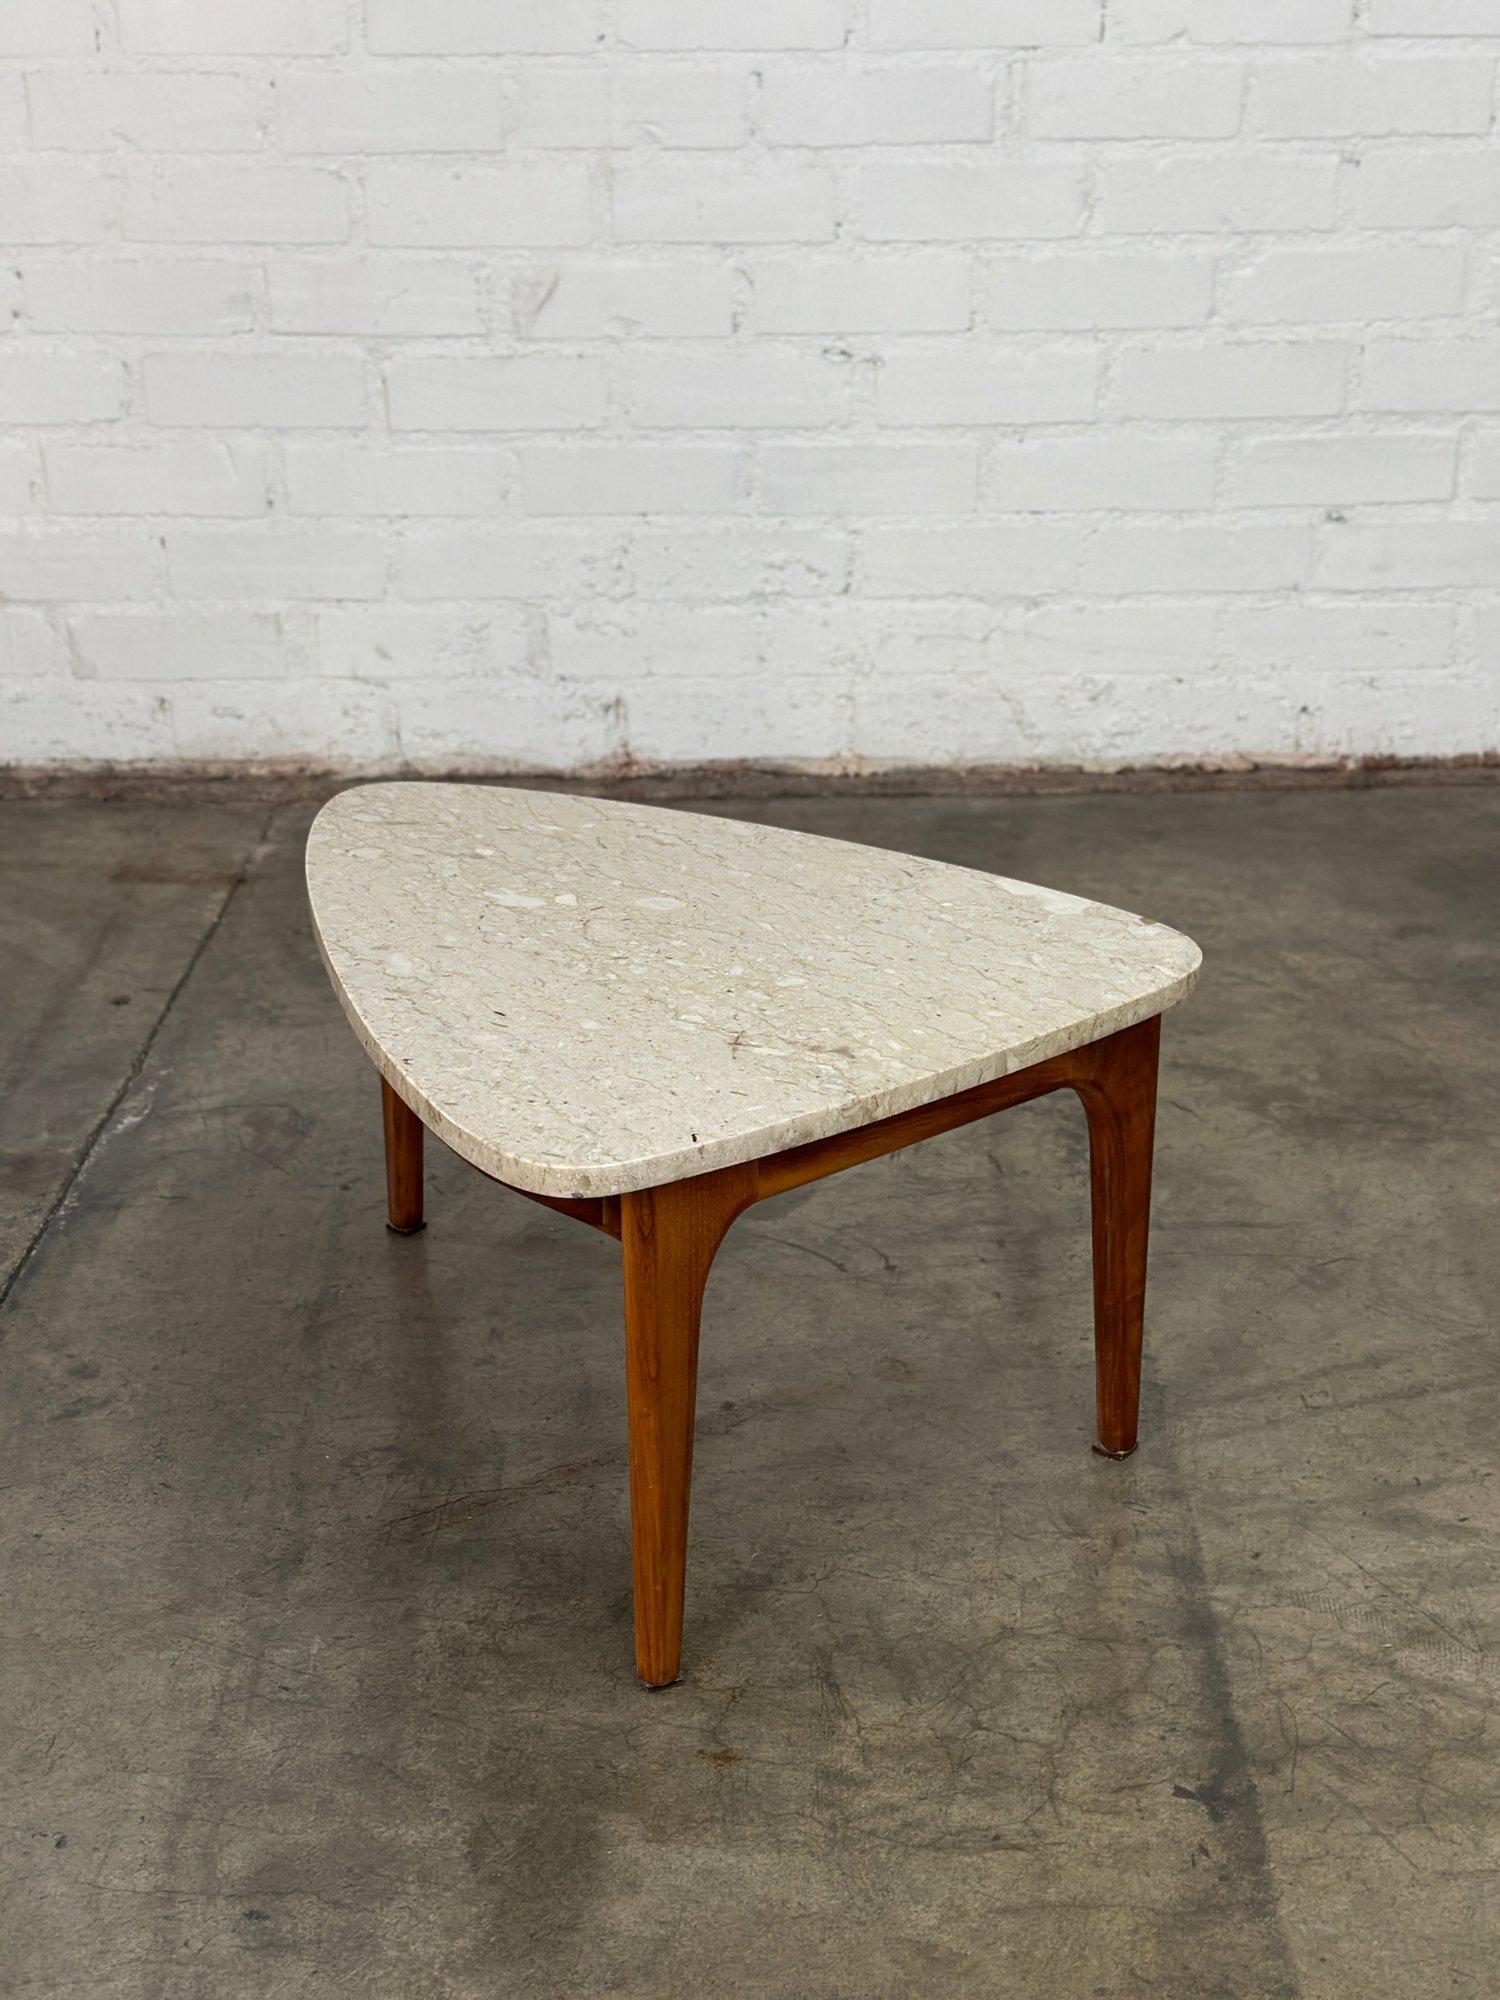 Triangular Travertine and Walnut Side table In Good Condition For Sale In Los Angeles, CA